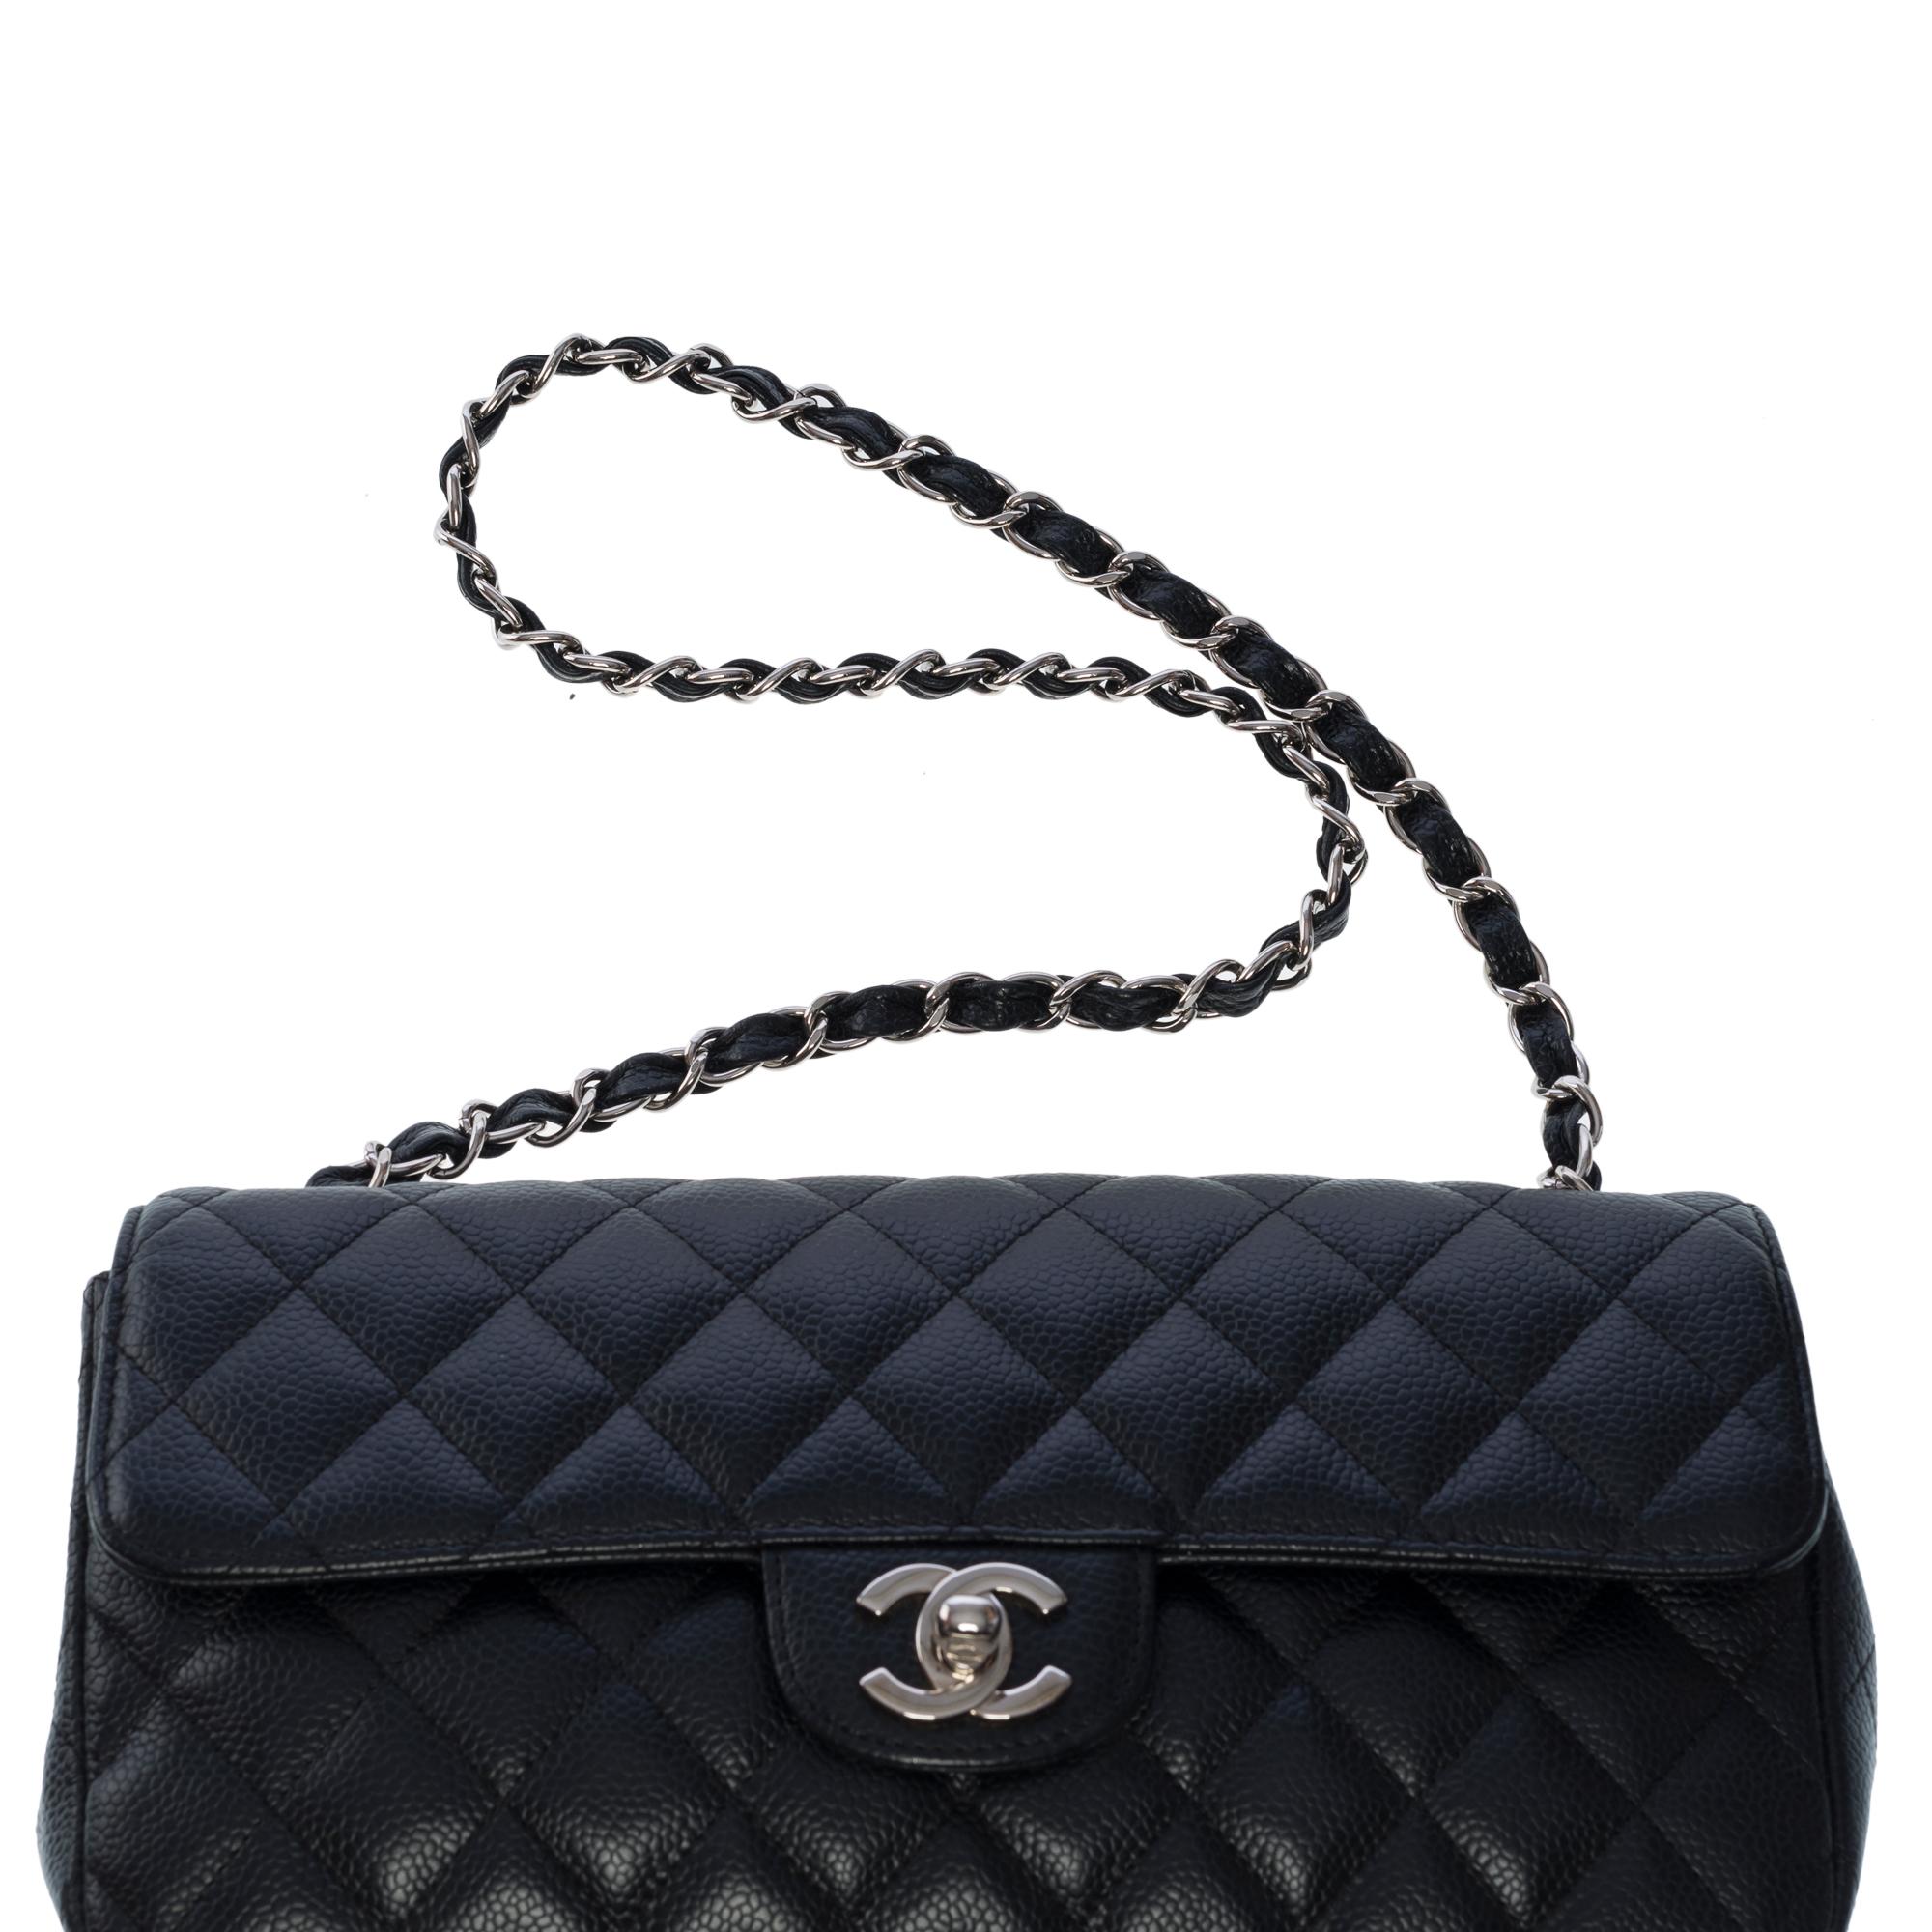 Chanel Classic Baguette shoulder bag in black caviar quilted leather , SHW 5